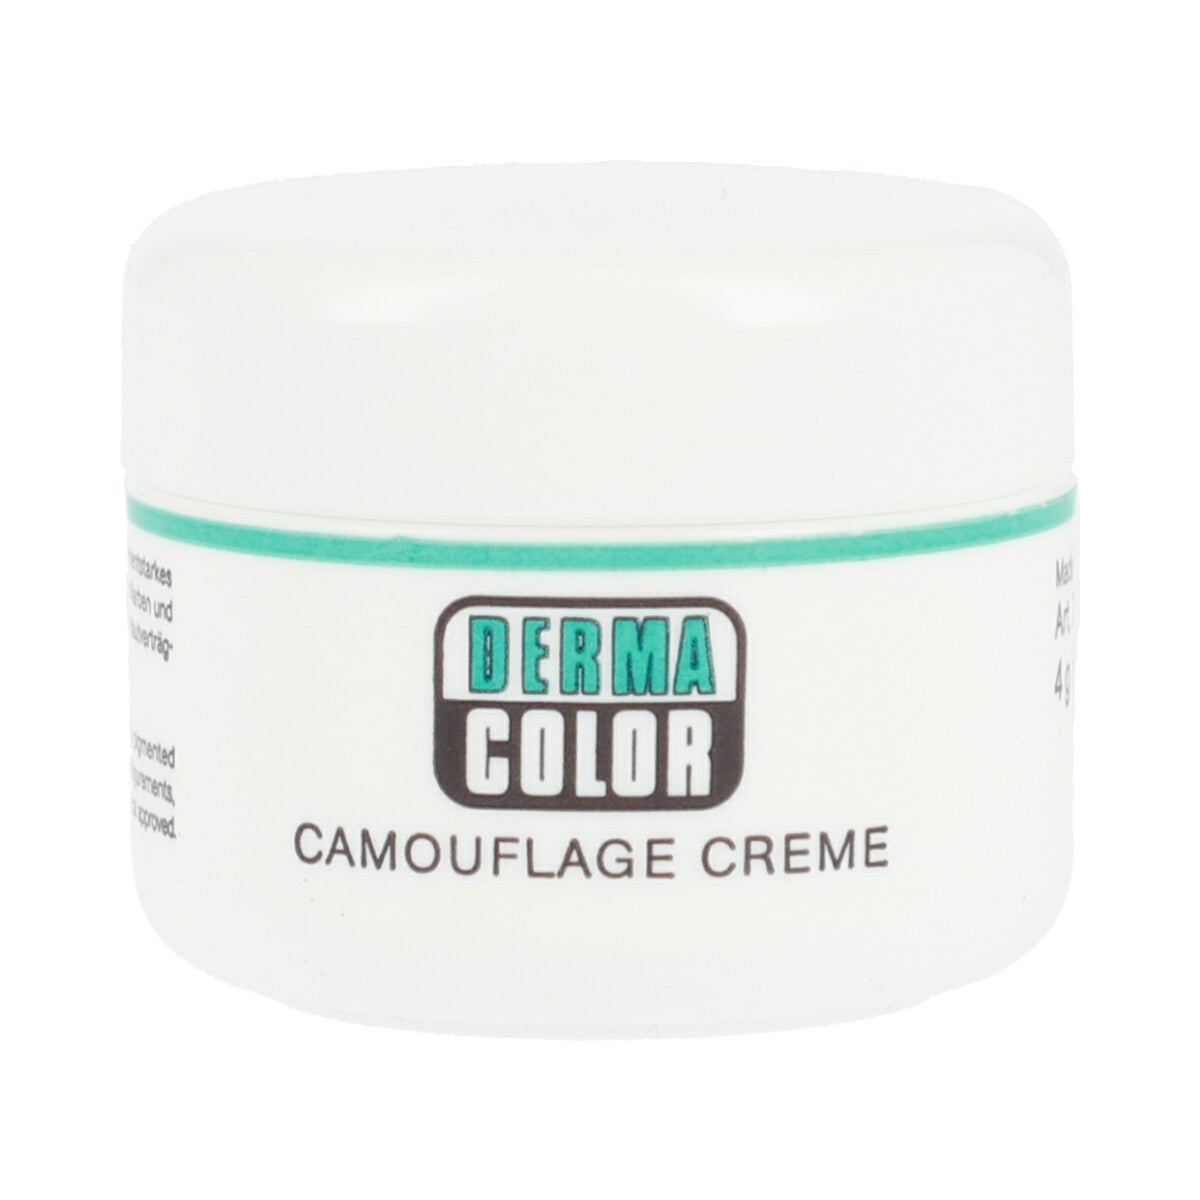 Camouflage Creme D30 - 4 grs